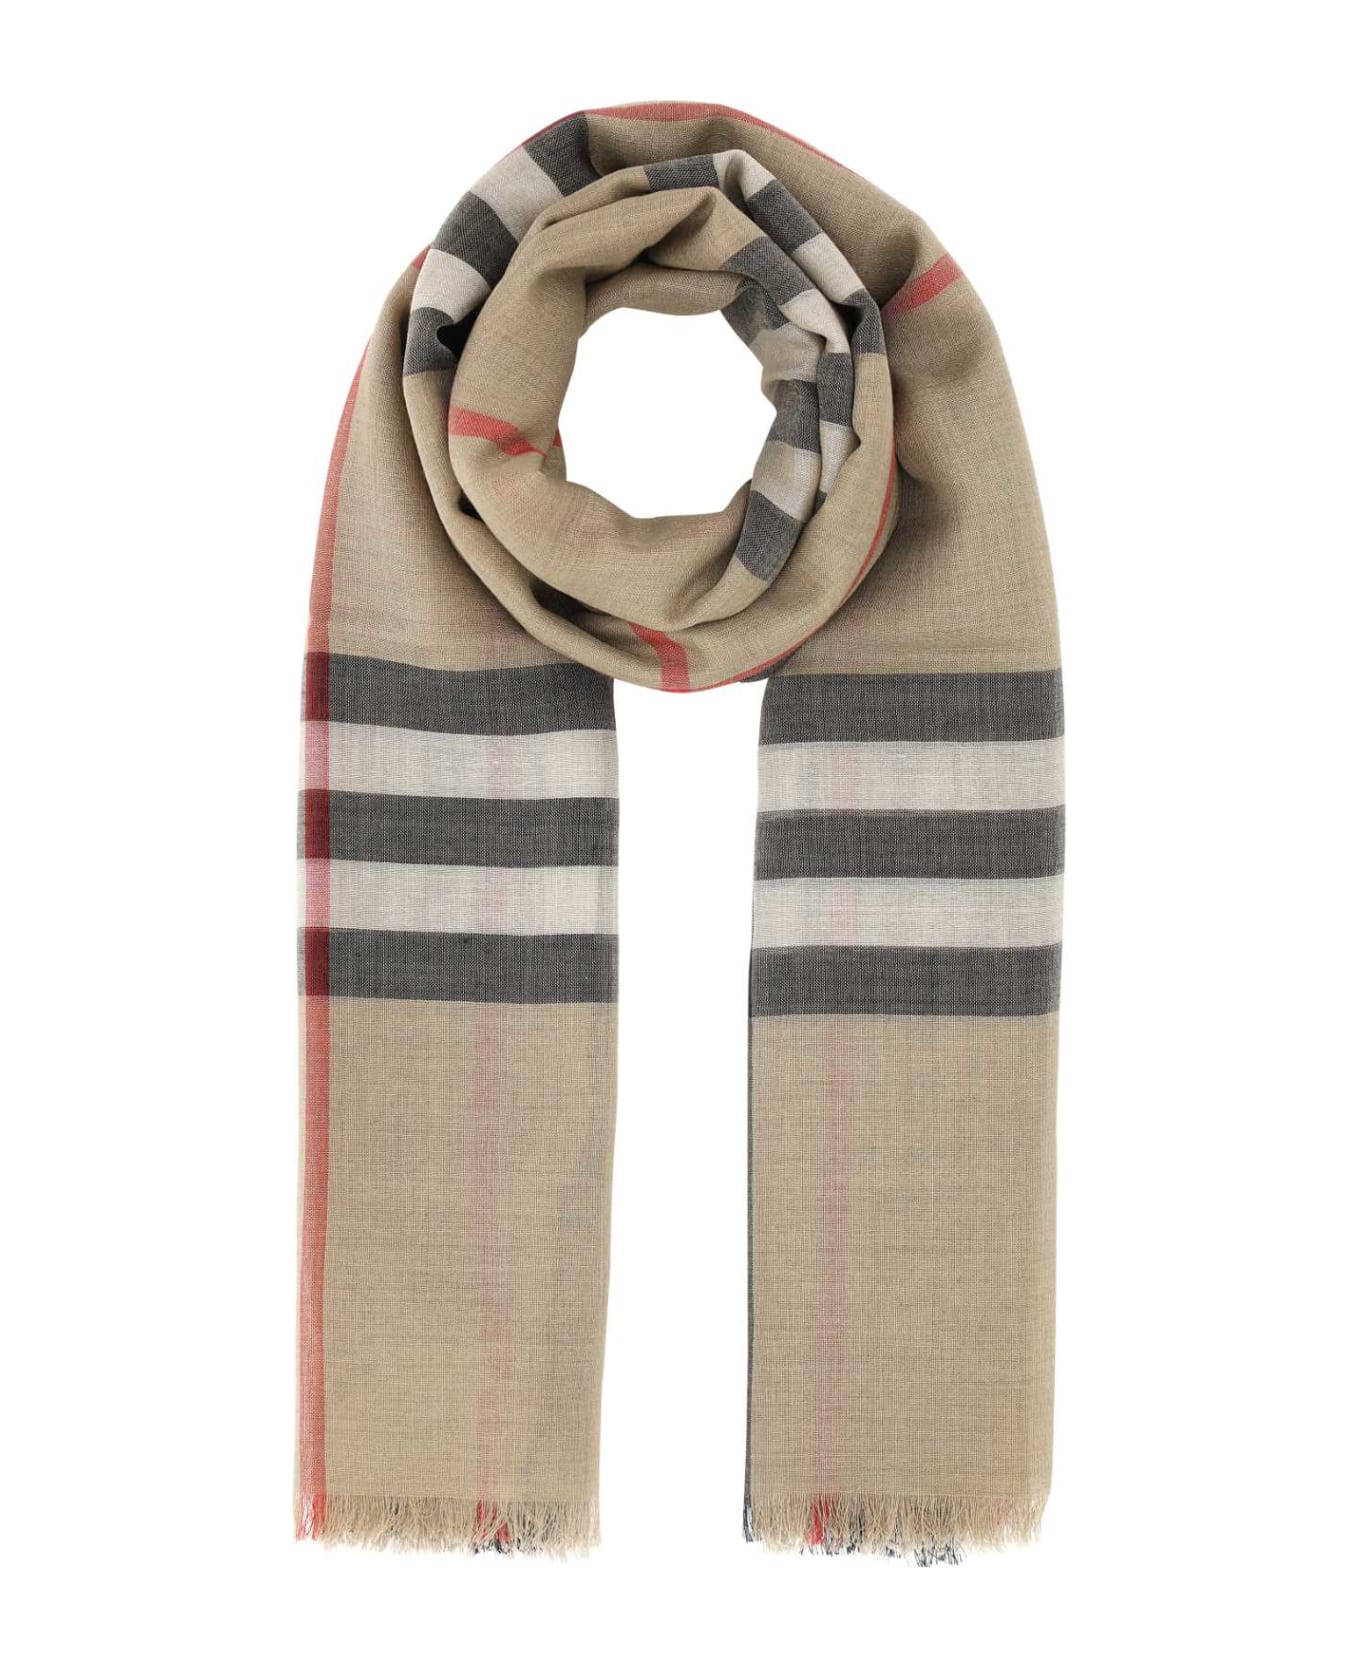 Burberry Embroidered Wool Blend Scarf - A7026